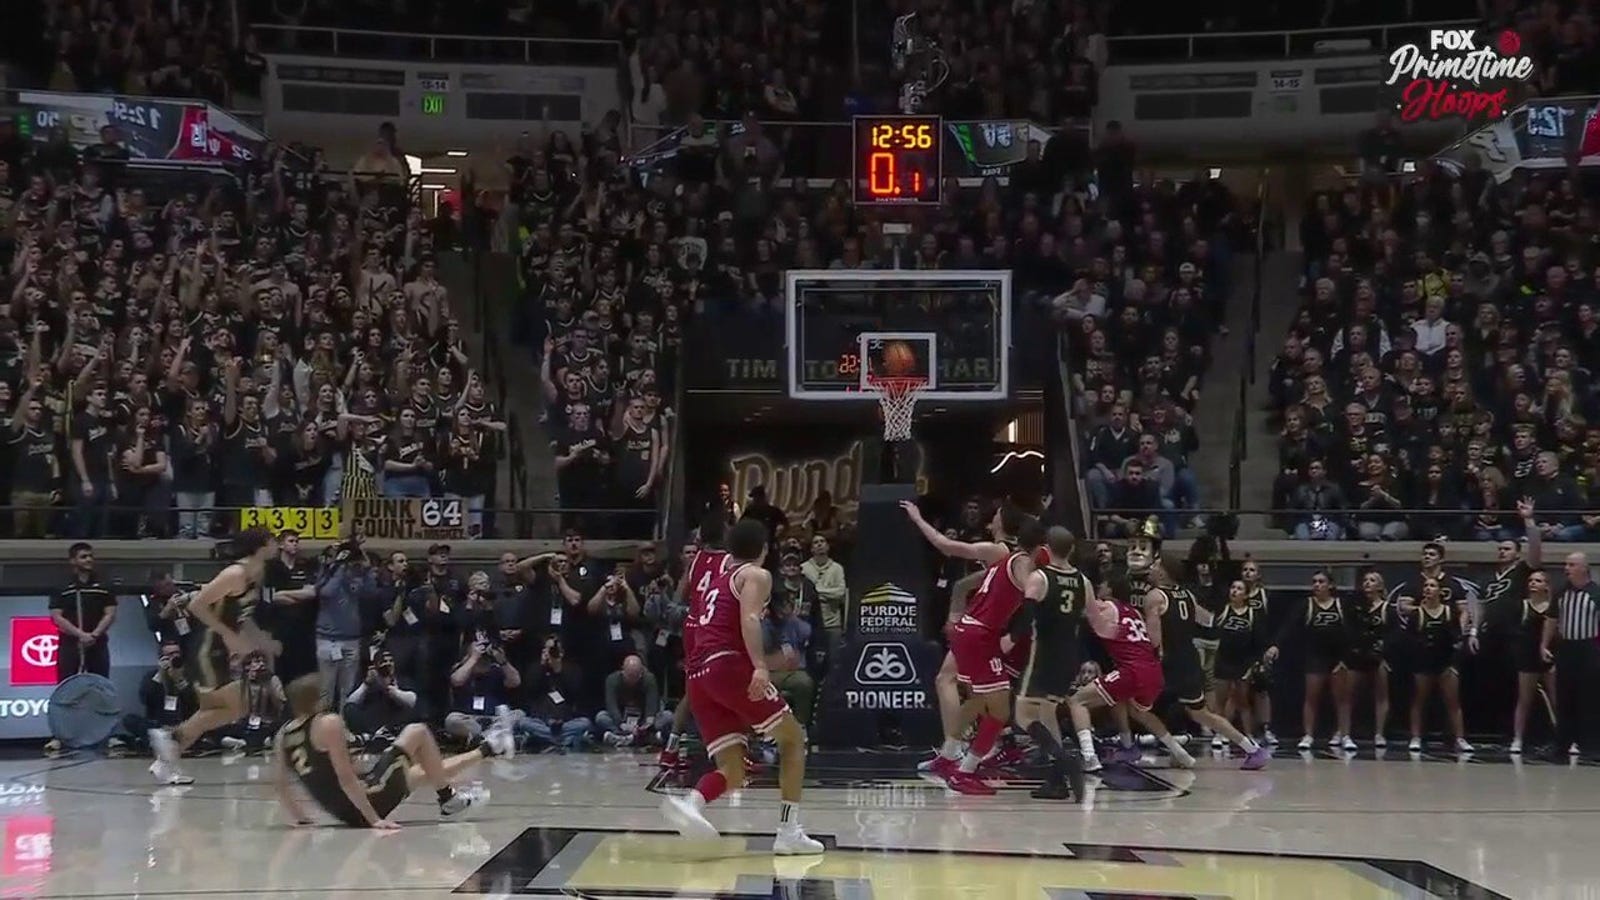 Purdue's Fletcher Lauer knocks down a 3-pointer while fouled against Indiana